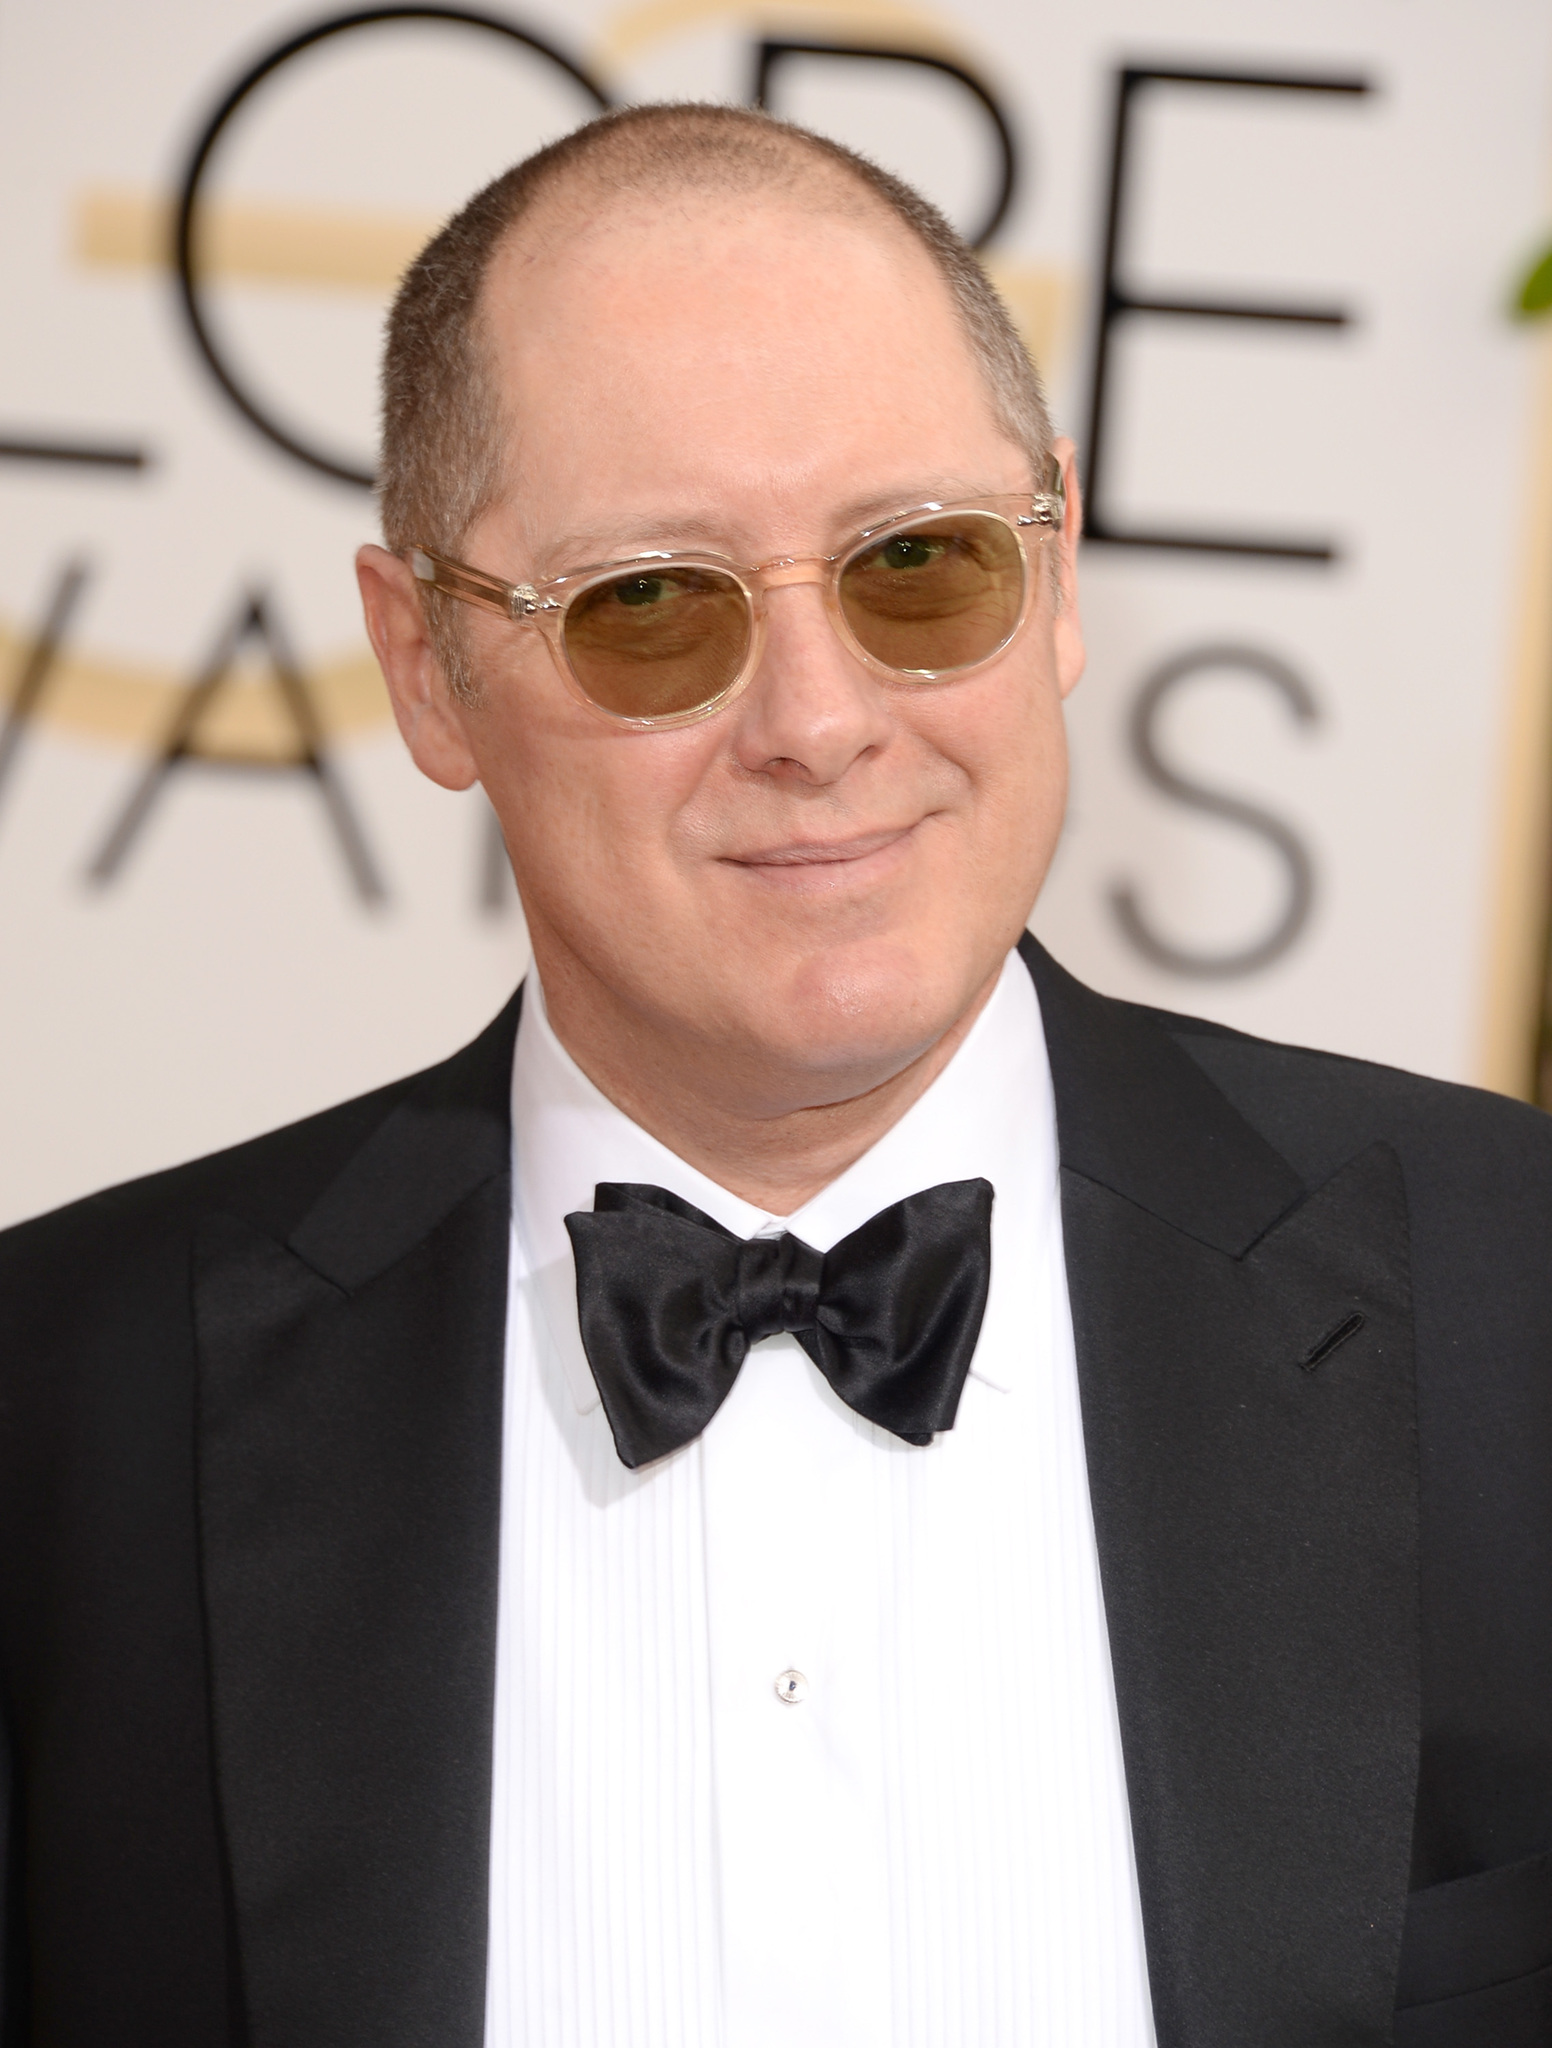 How tall is James Spader?